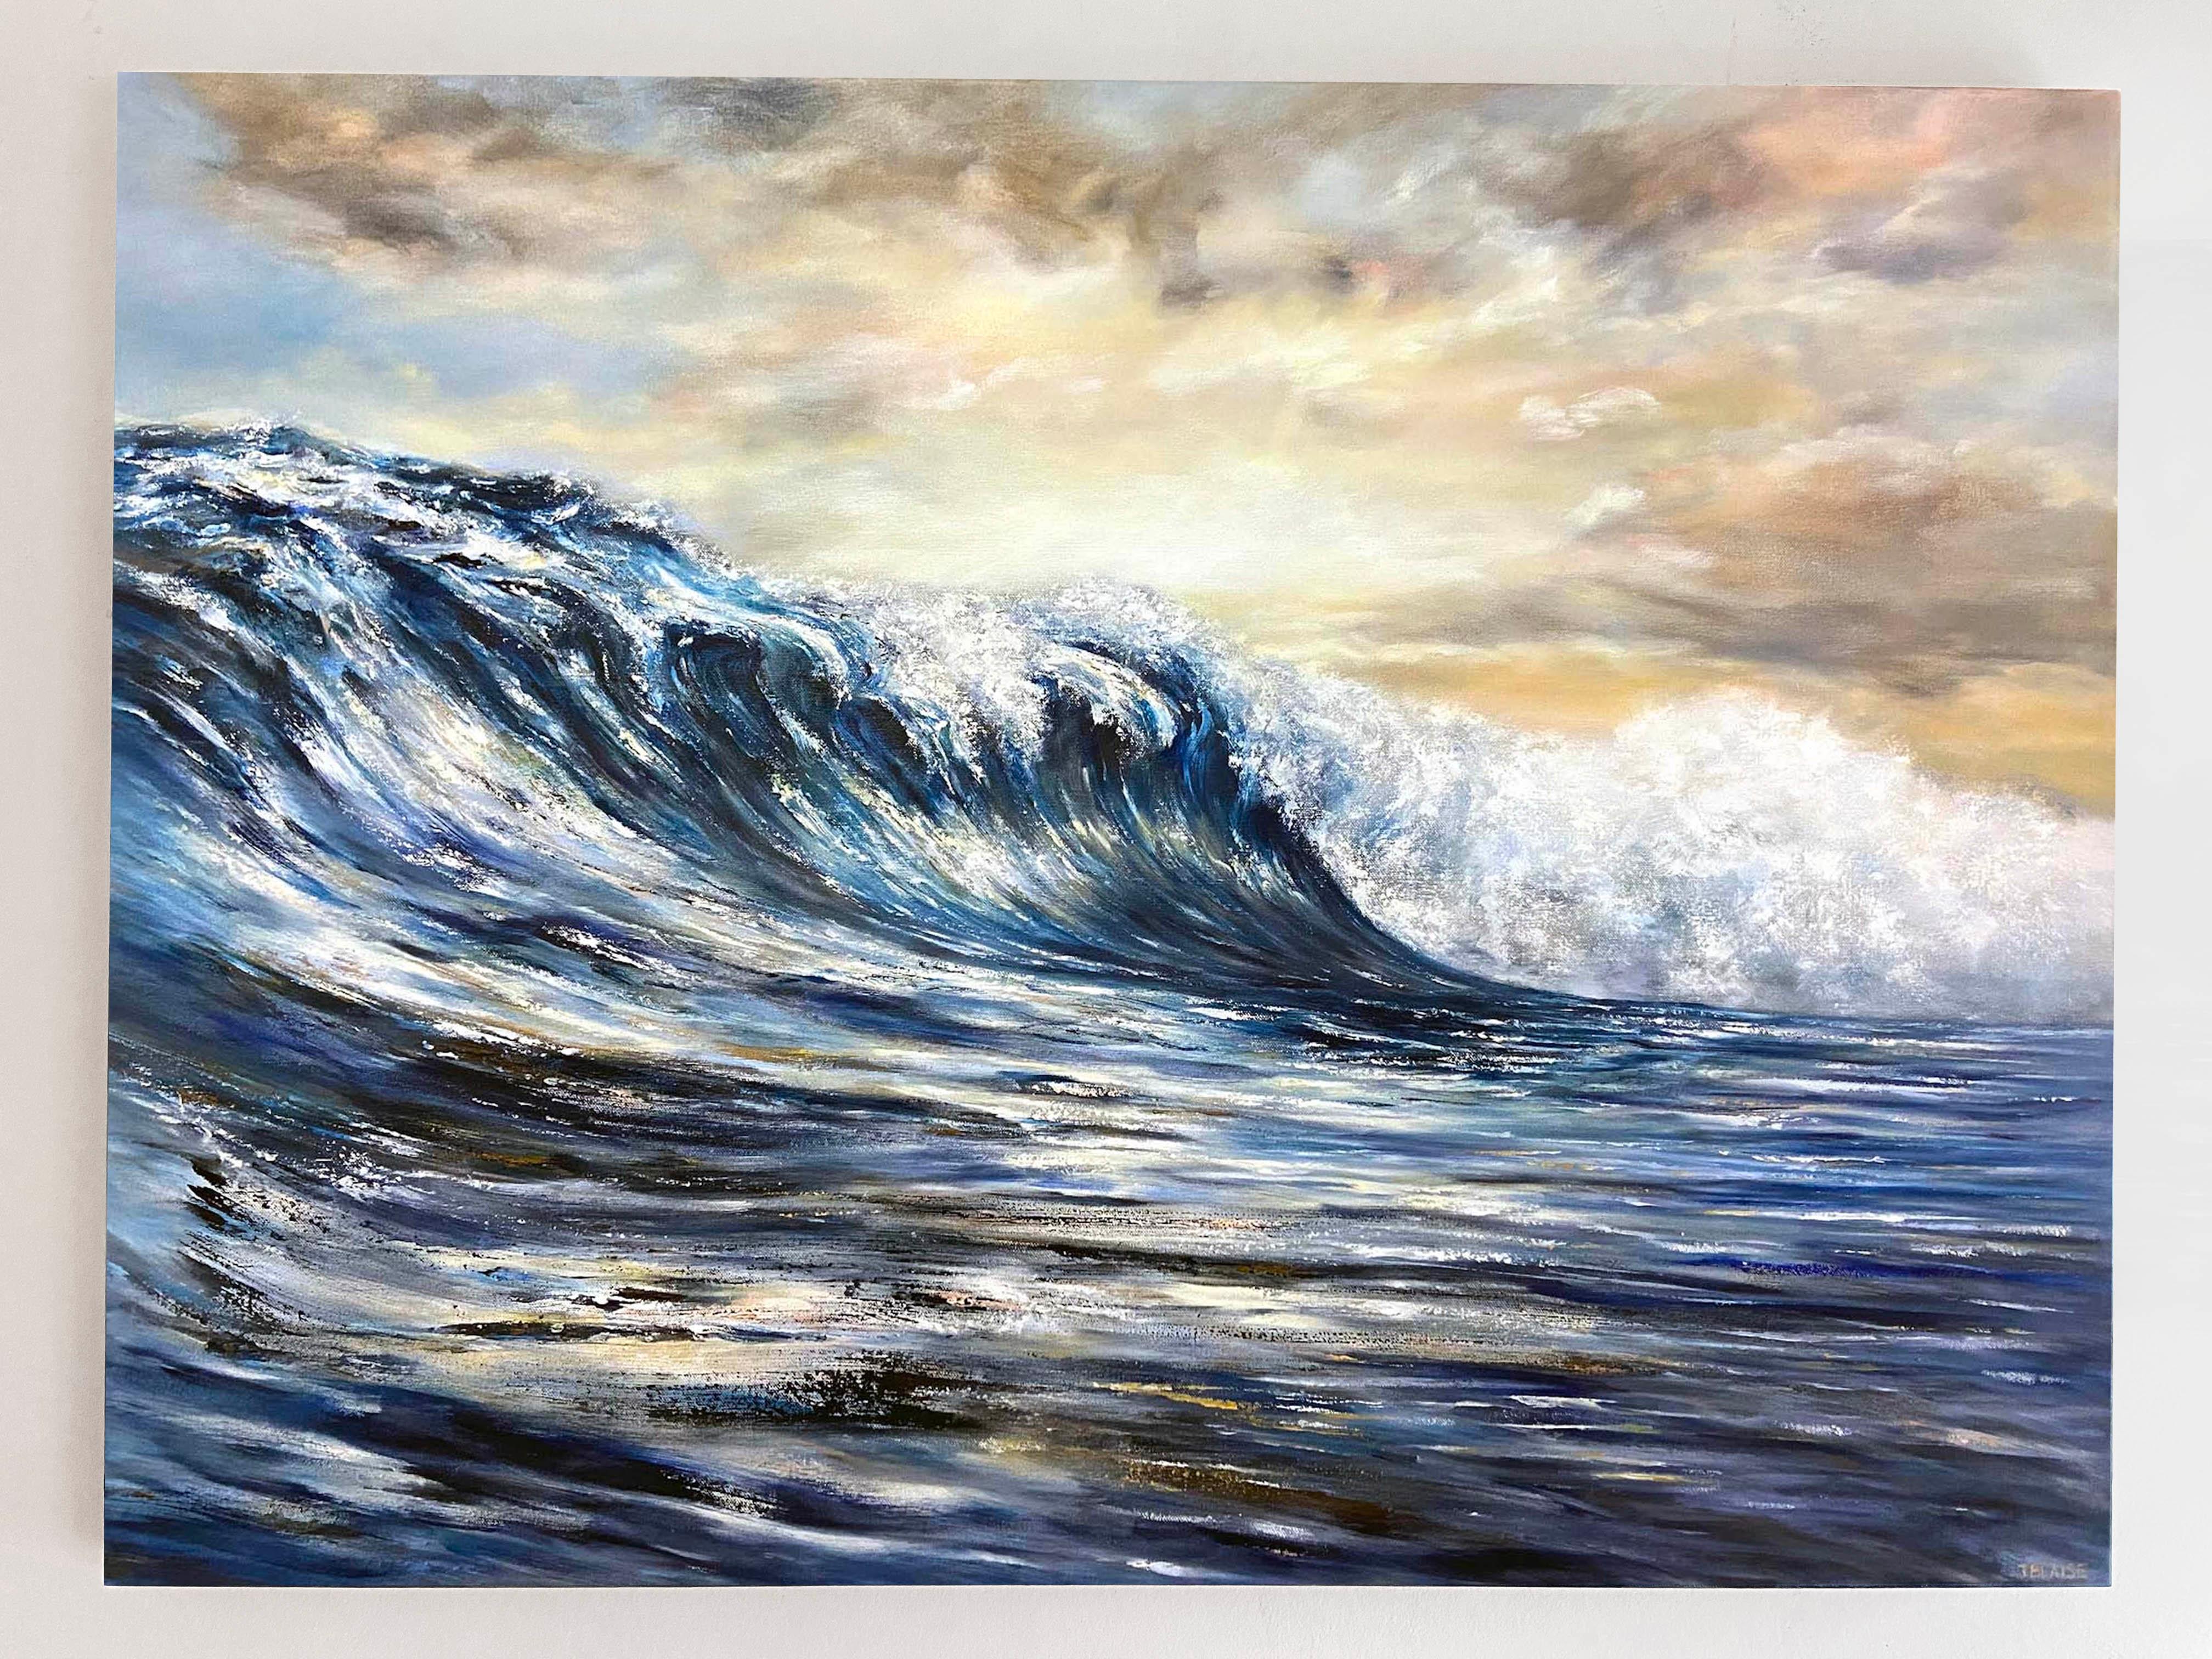 <p>Artist Comments<br />This painting depicts crashing waves shimmering on the ocean's surface with the use of palette knives and brushes. Soft clouds, ablaze with warm hues, reflect upon the water, creating an enchanting scene. Through the